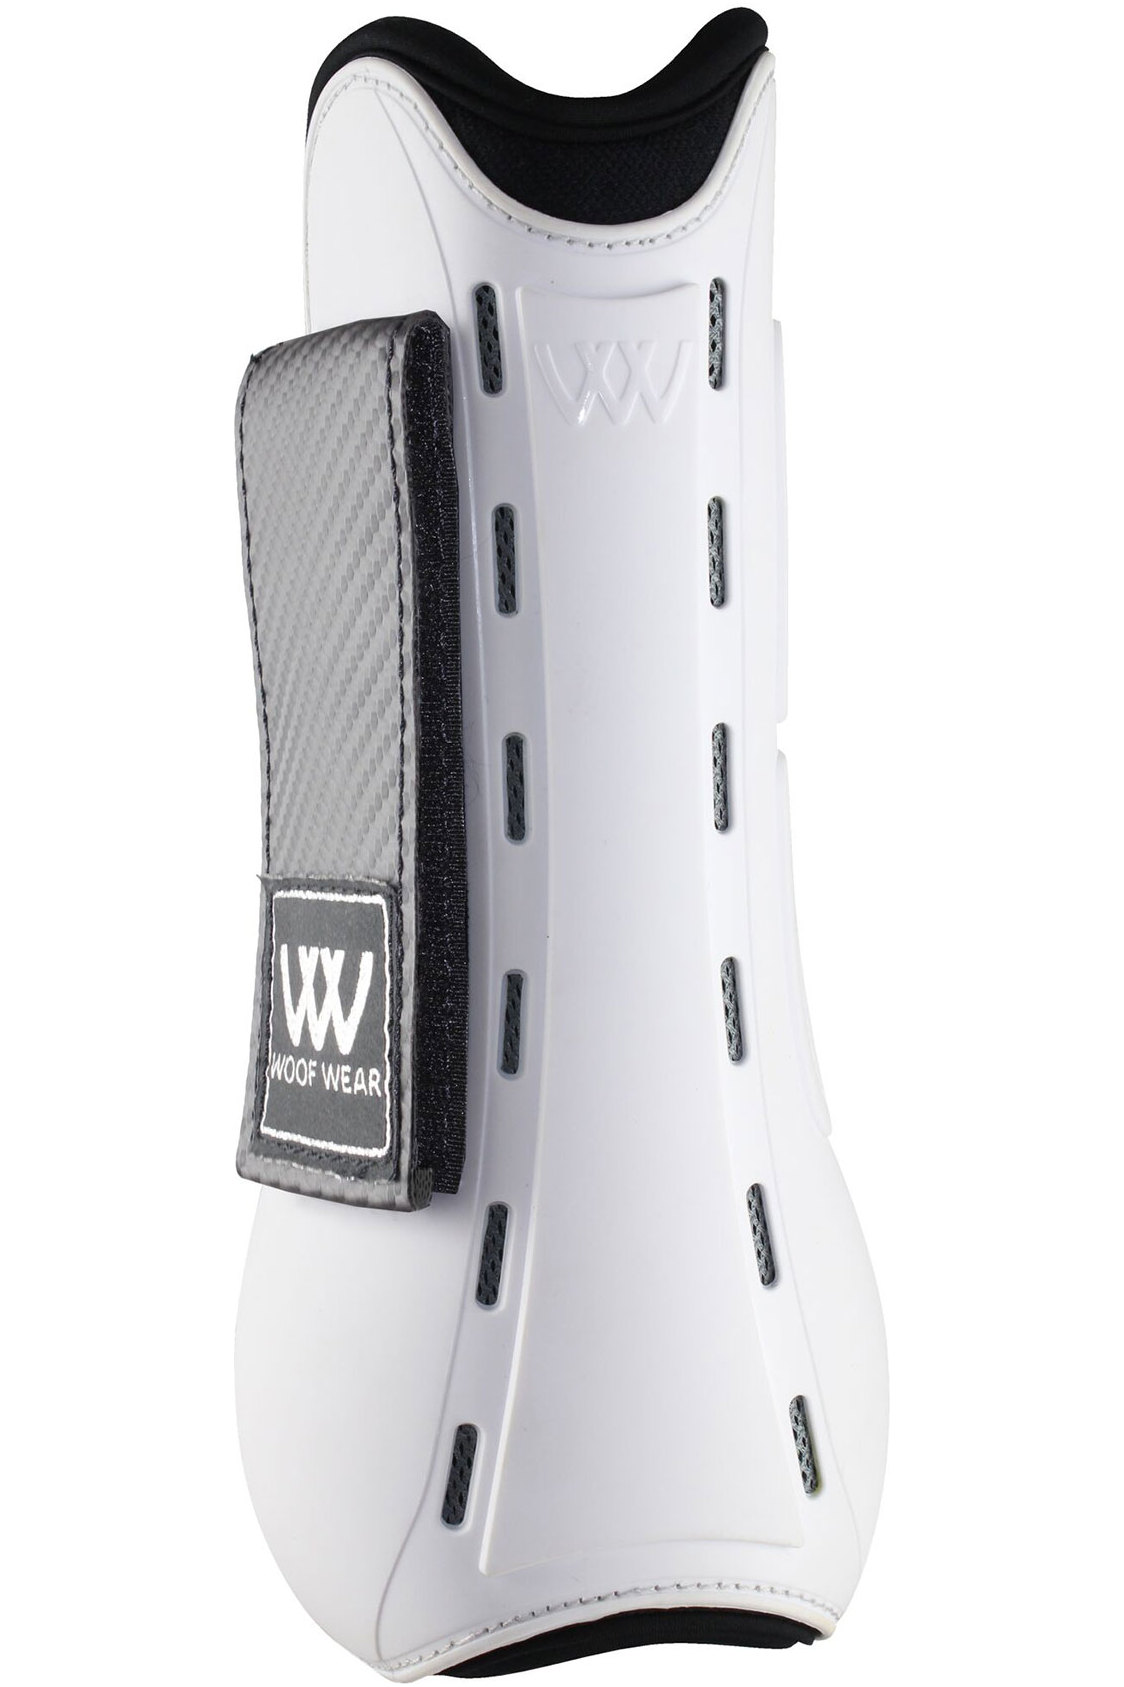 Woof Wear Pro Tendon General Use Protective Equestrian School Horse Riding Boot 